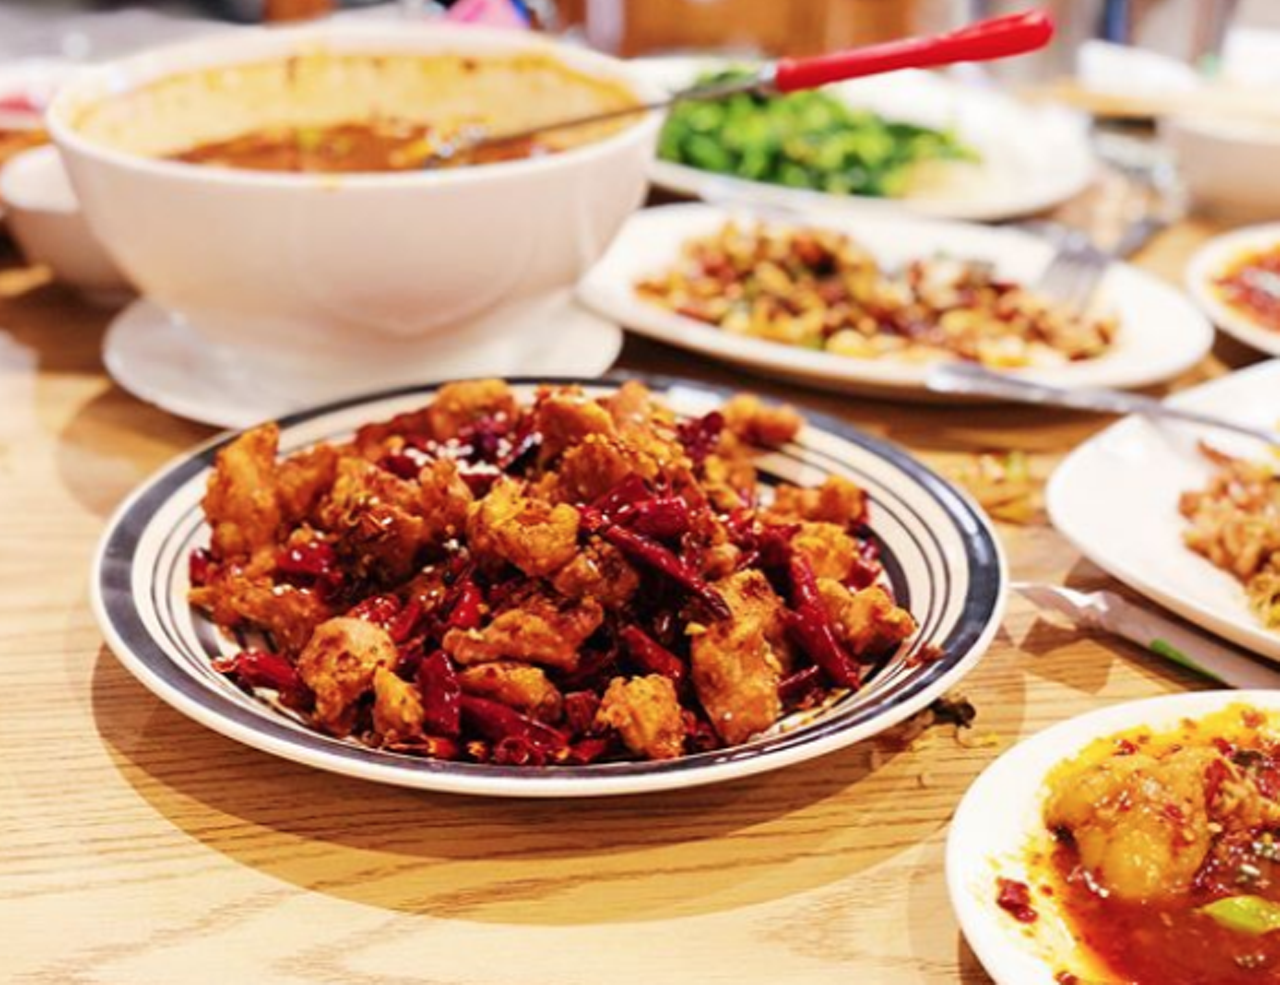 Sichuan Garden
2347 NW Military Hwy, (210) 265-5750, eatsichuan.net
The OG Sichuan spot in SA is still going strong. Try the challenging sliced pig’s ear or duck tongues with jalapeño before retreating to the likes of the (also very good) stir-fried lamb with cumin.
Photo via Instagram / j.a.flora